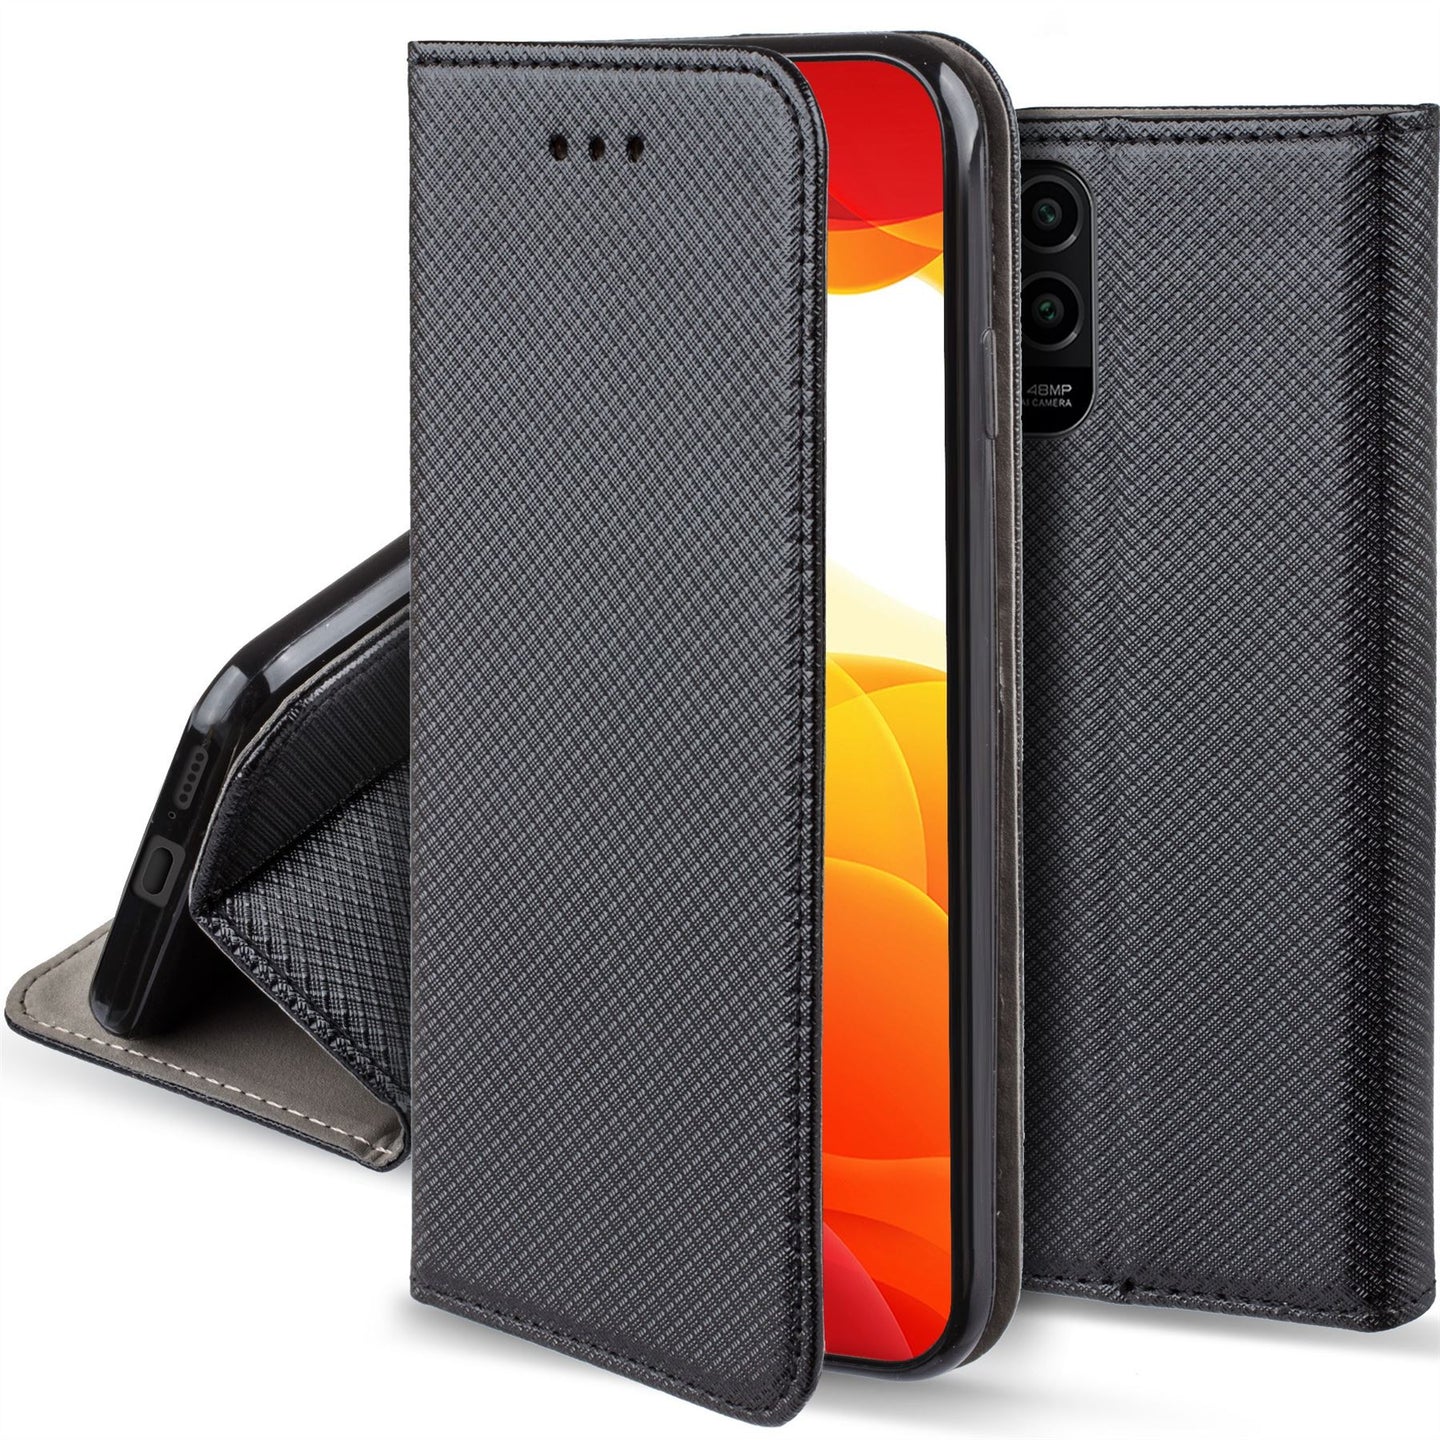 Moozy Case Flip Cover for Xiaomi Mi 10 Lite 5G, Black - Smart Magnetic Flip Case with Card Holder and Stand